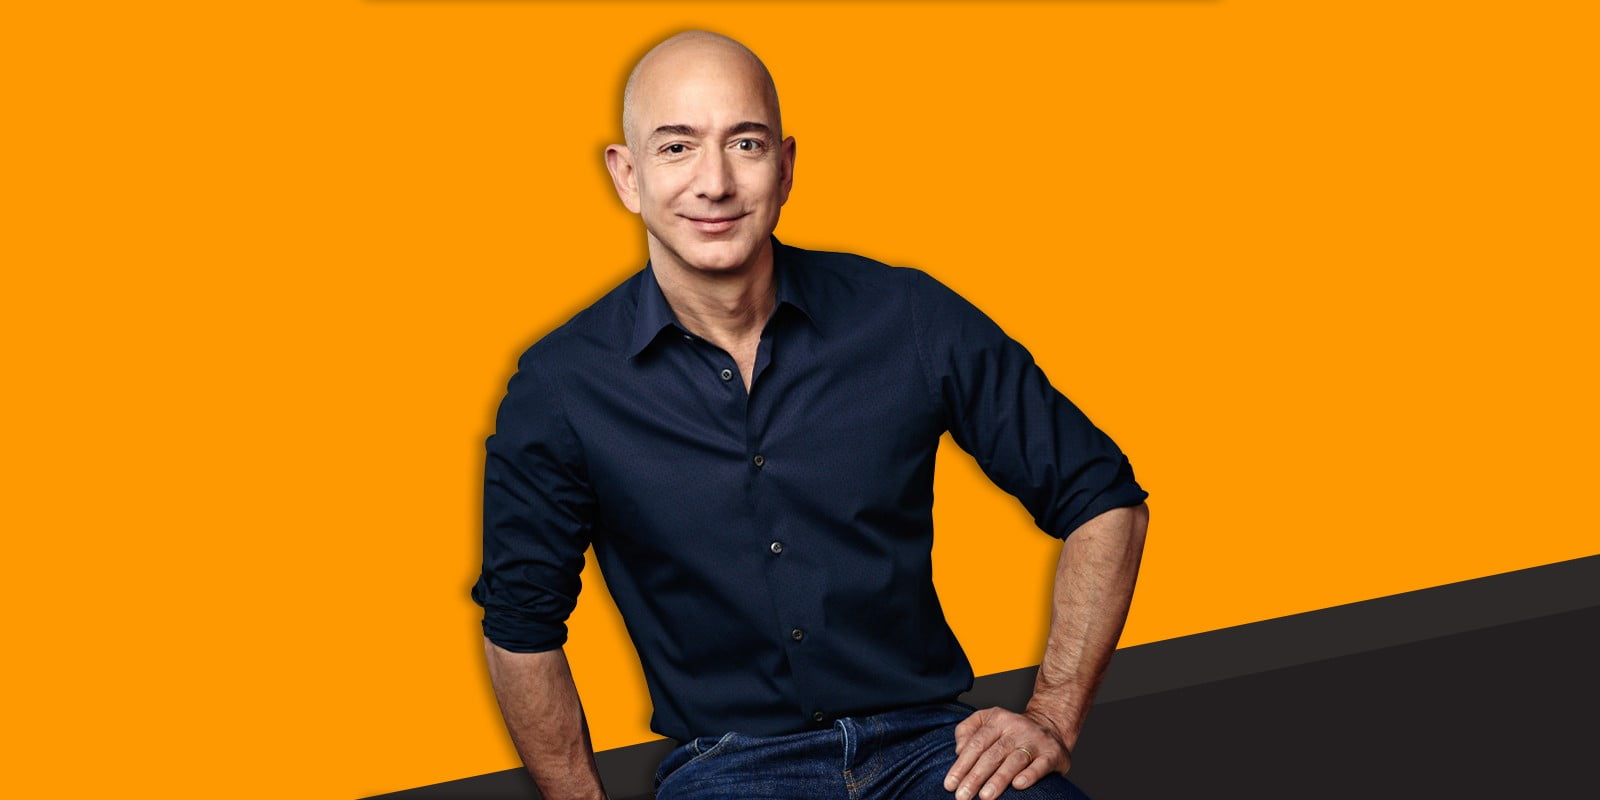 Jeff Bezos Steps Down As Amazon Ceo After 27 Years